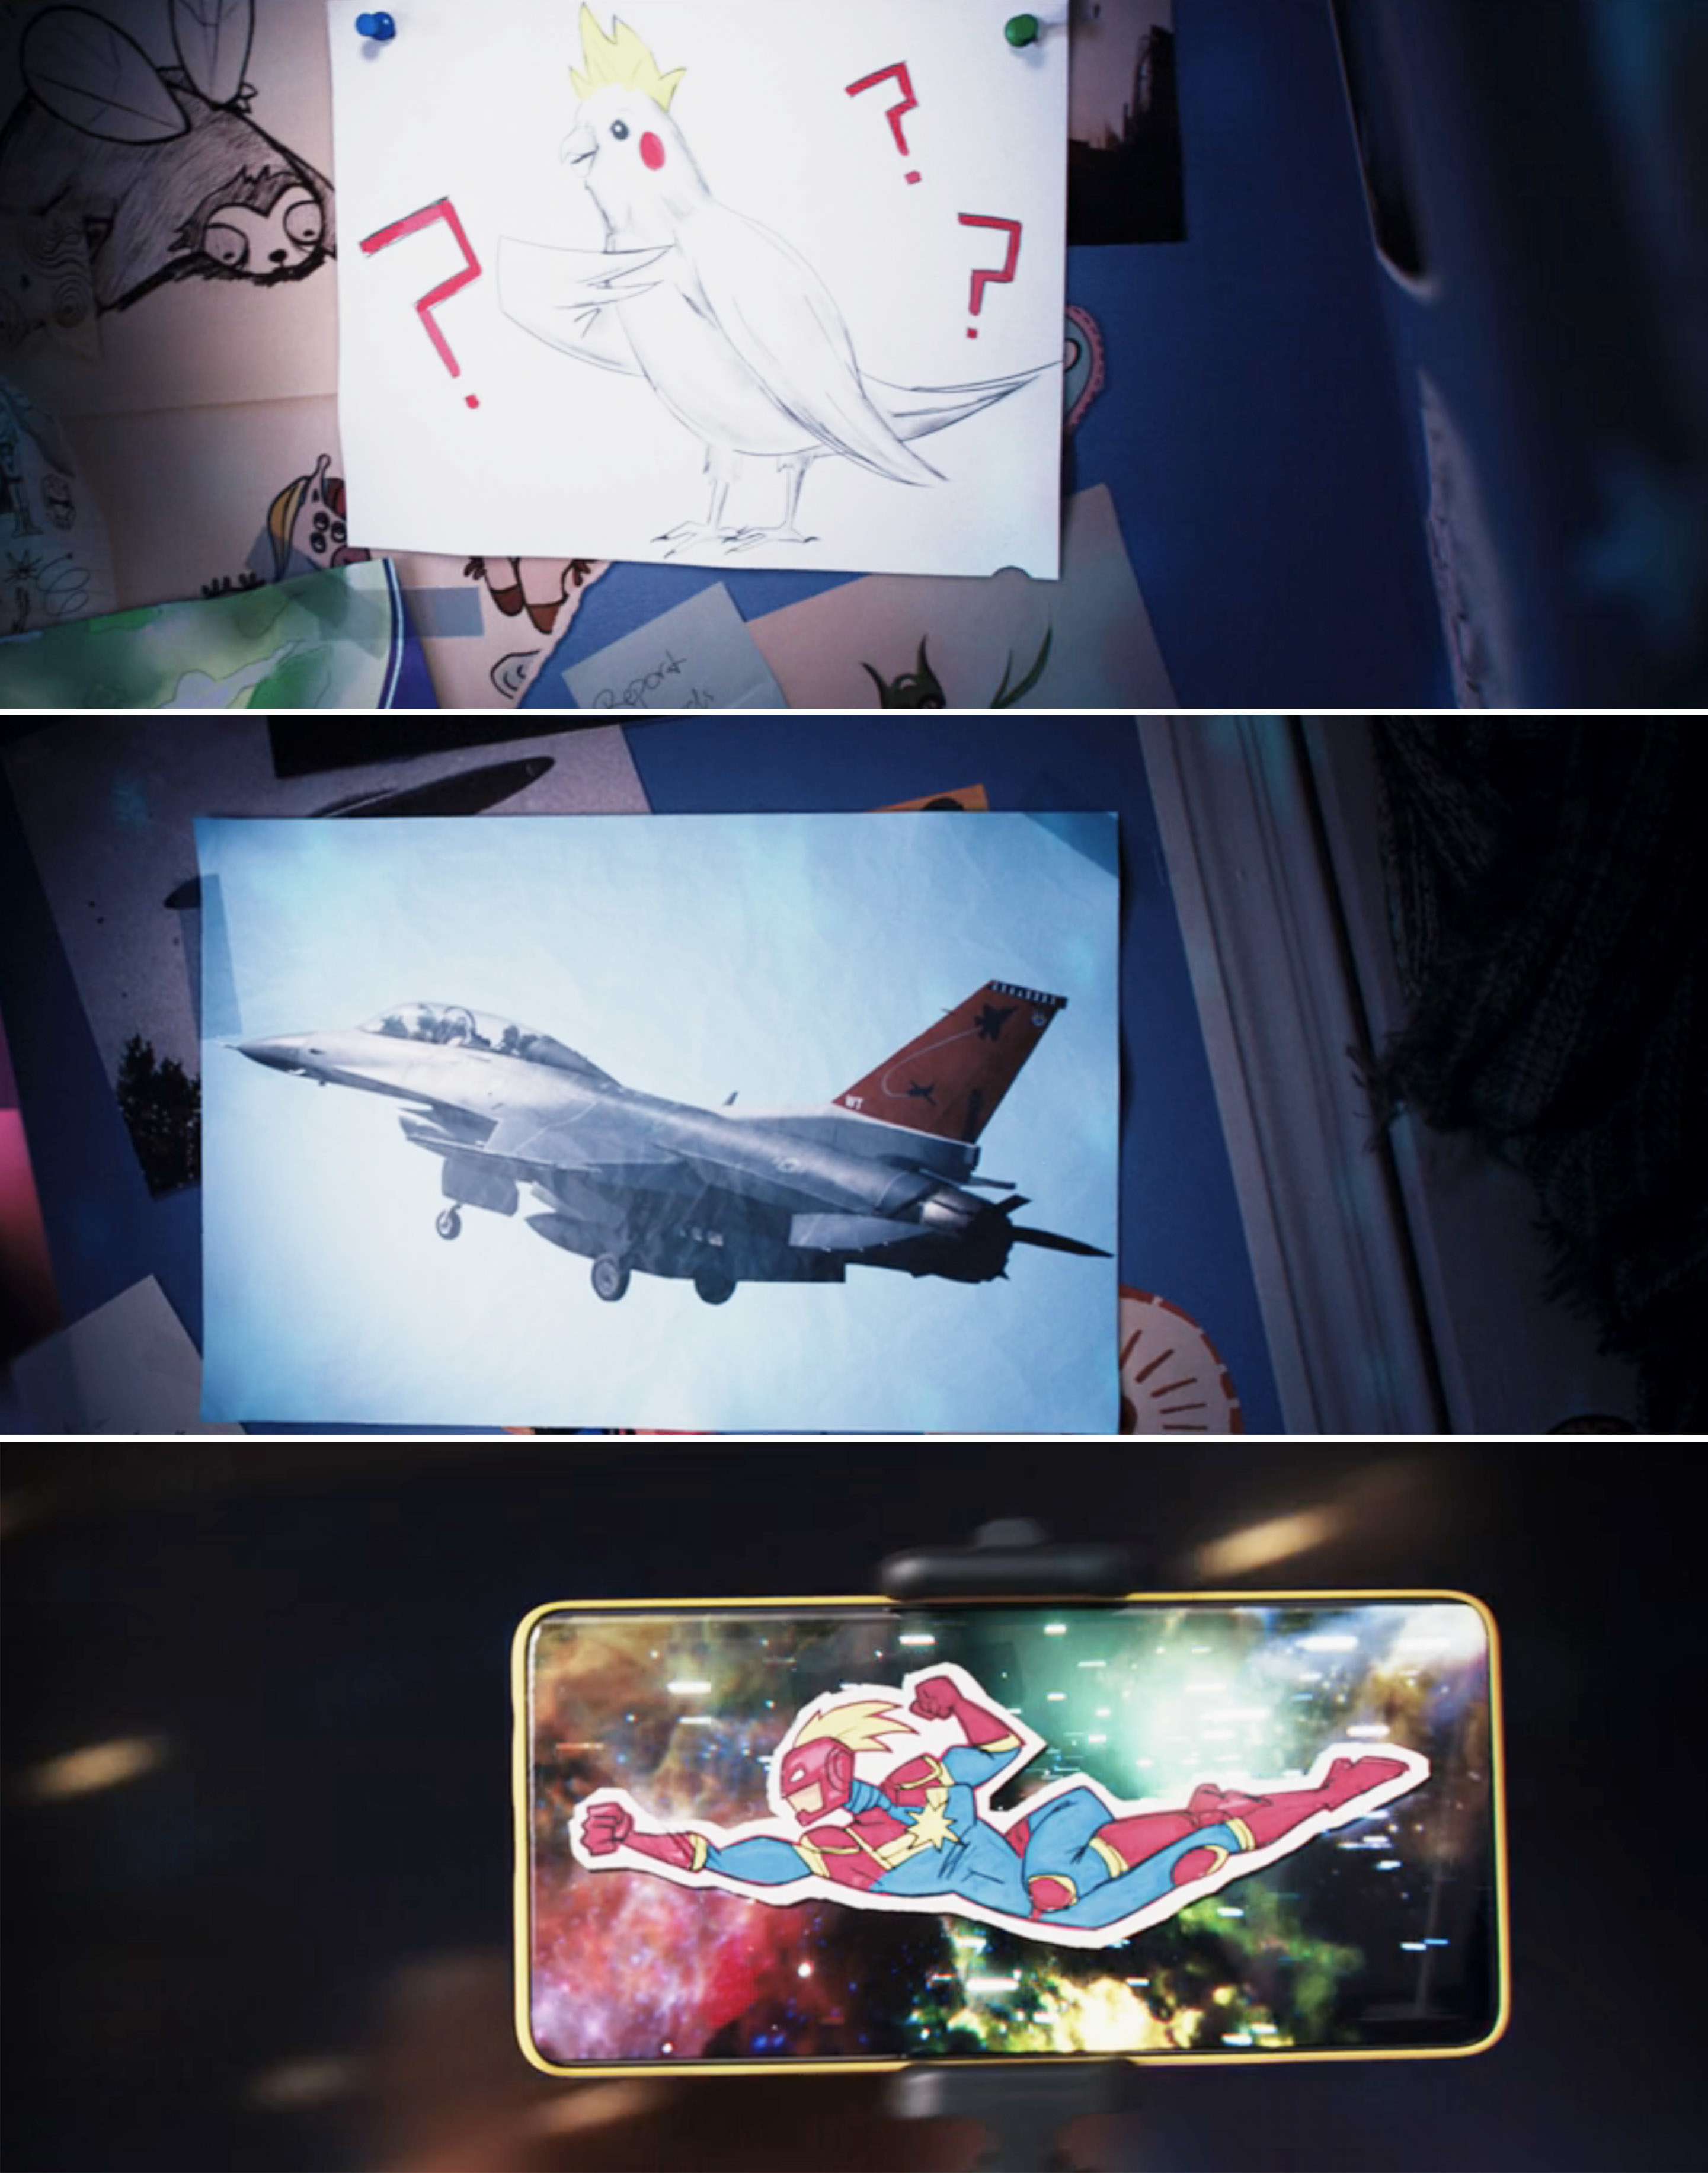 Three images back to back that show a hand-drawn bird, a photo of a real jet, and then a cartoon image of Captain Marvel on a cellphone